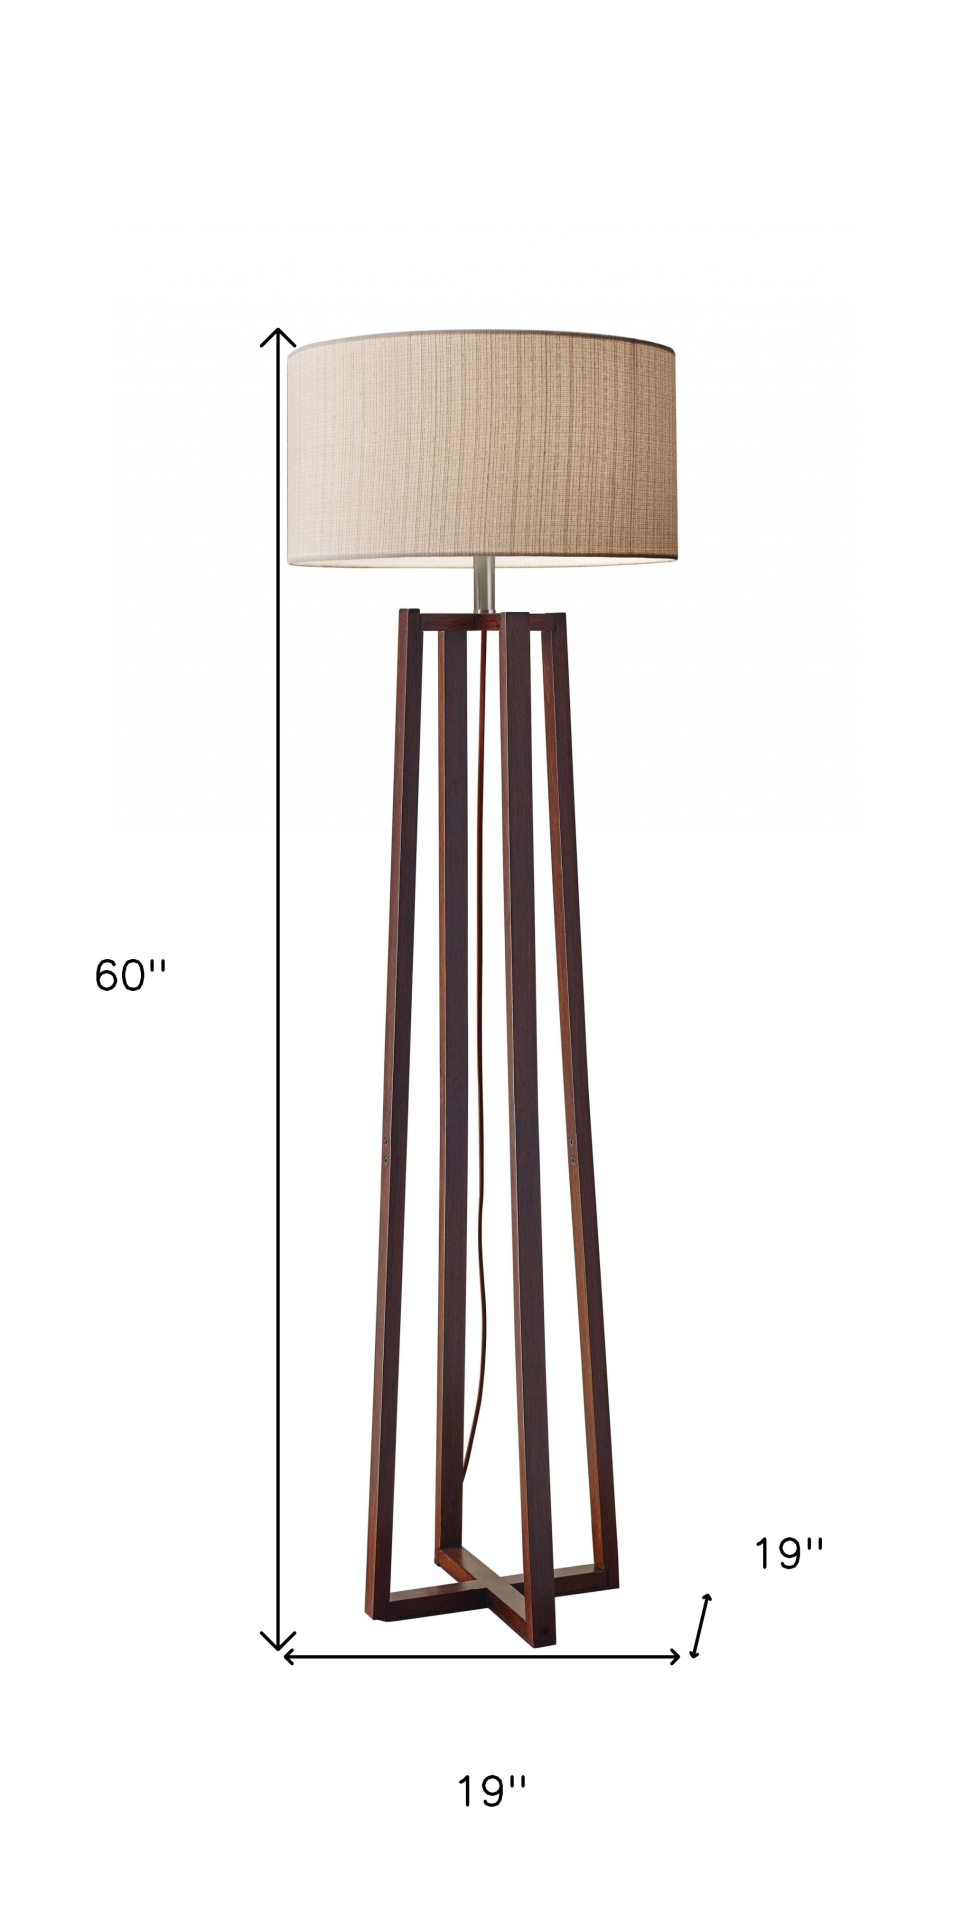 Chic Modern Style Solid Wood Floor Lamp (60"H)